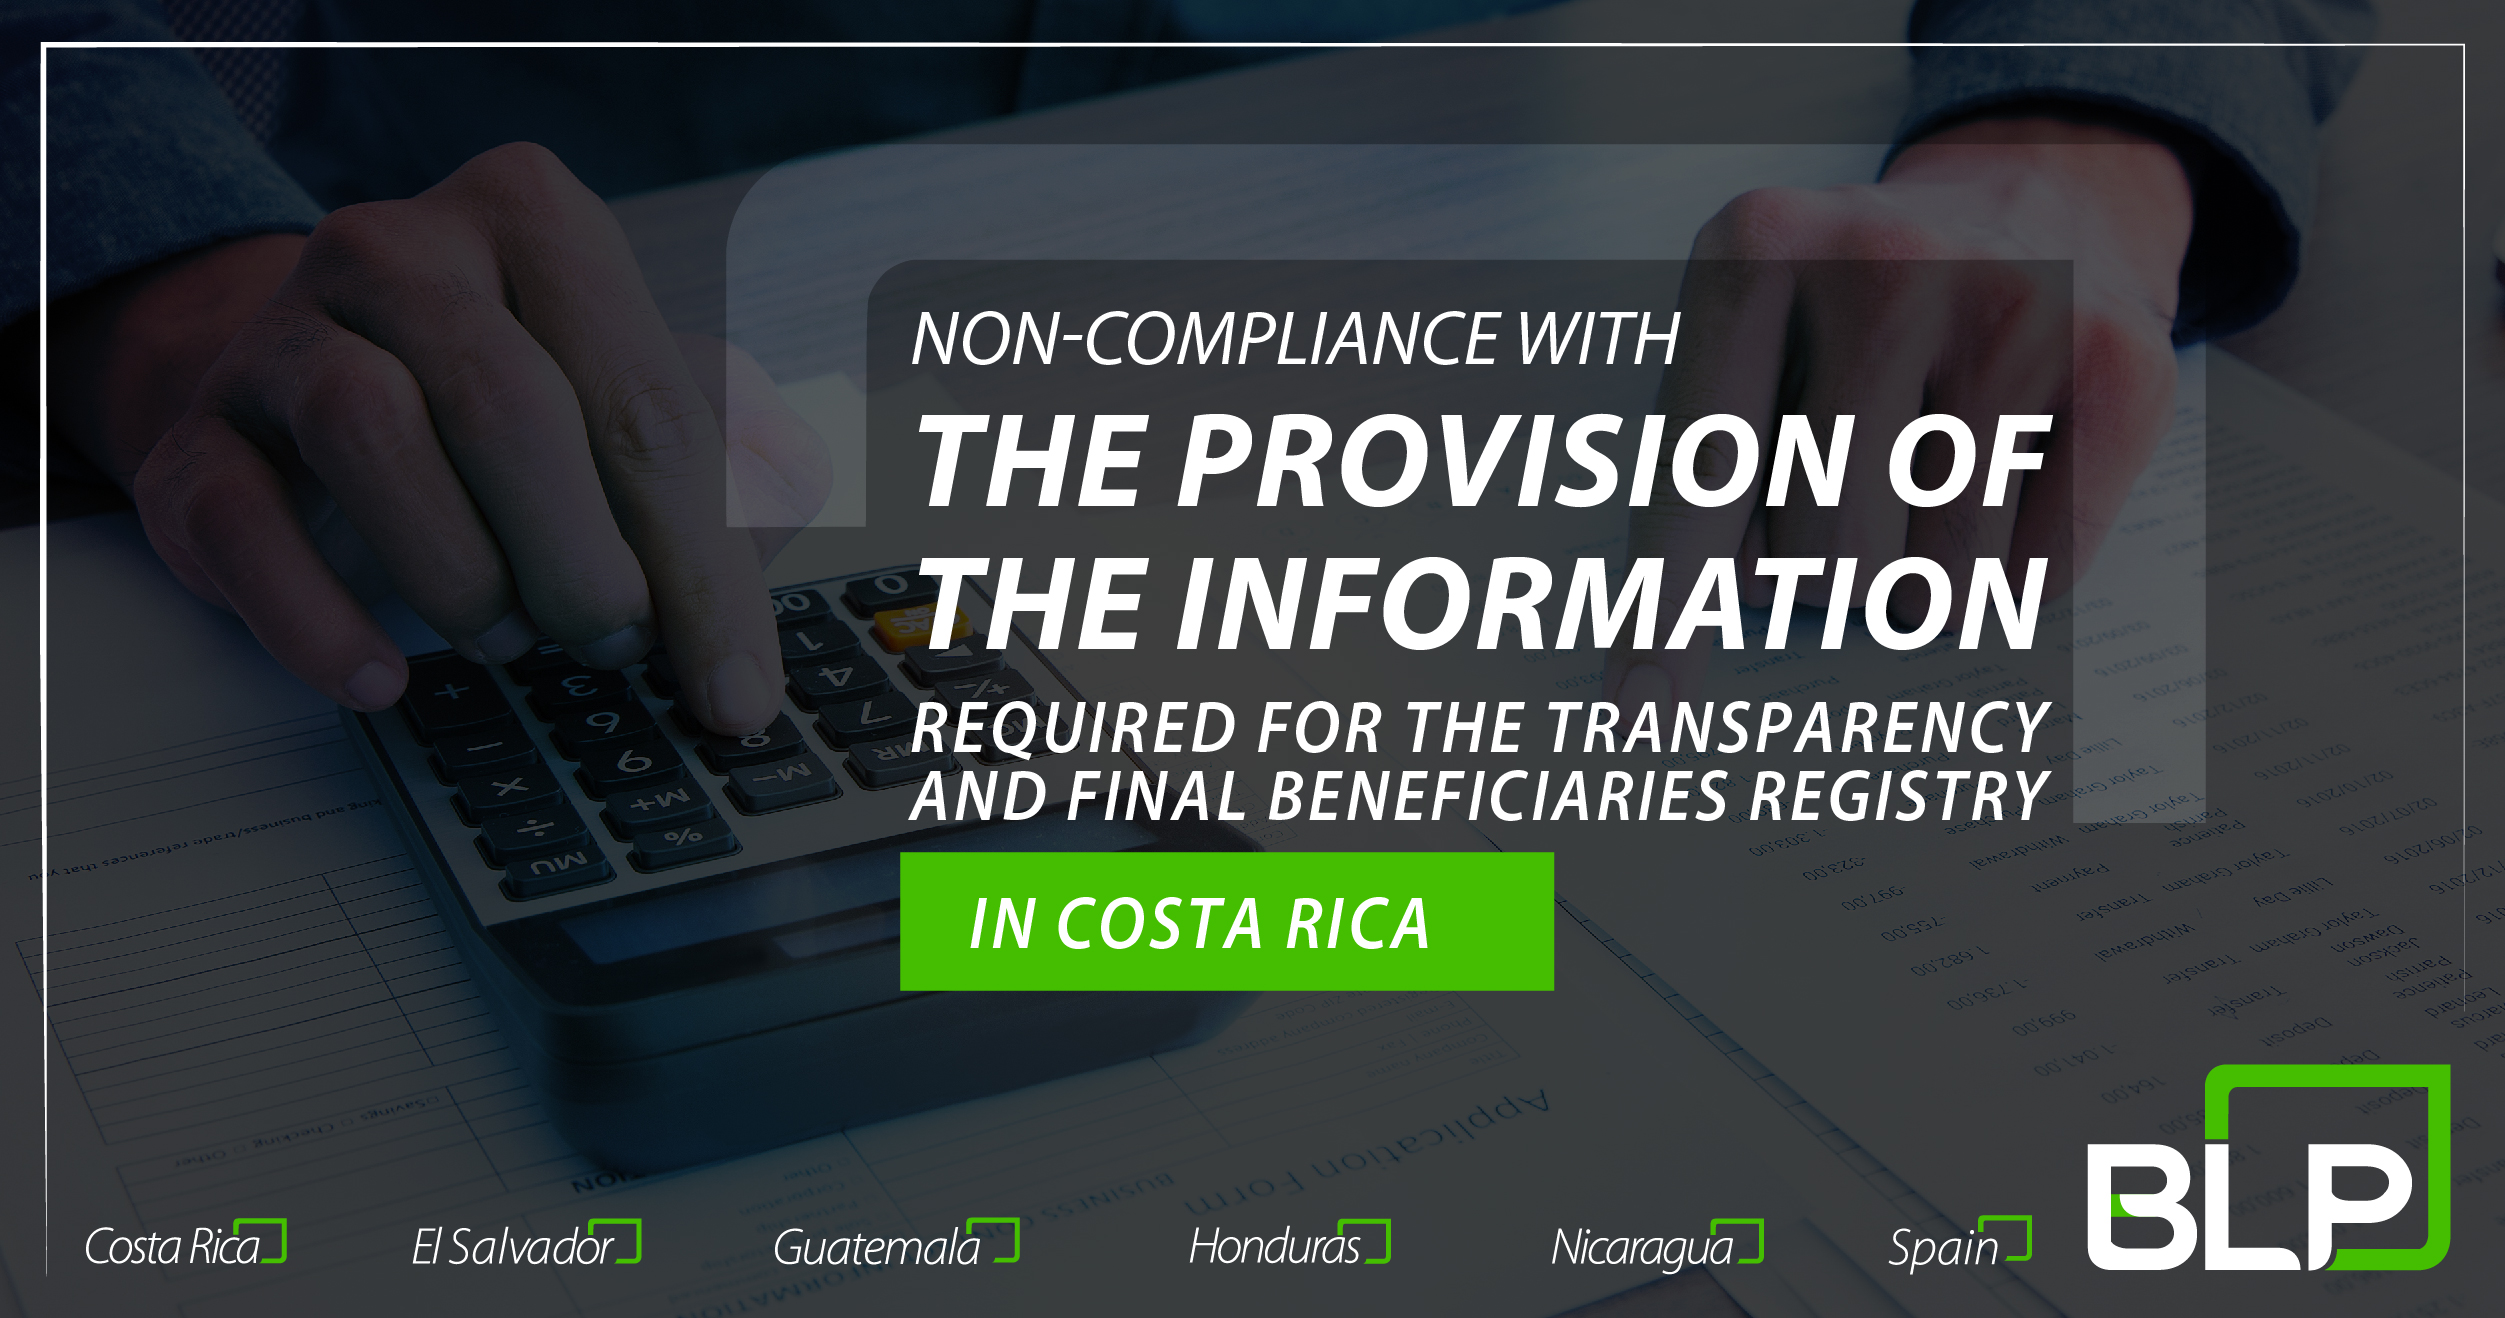 Procedure for the payment of the fine for non-compliance with the provision of information regarding the Transparency and Final Beneficiaries Registry